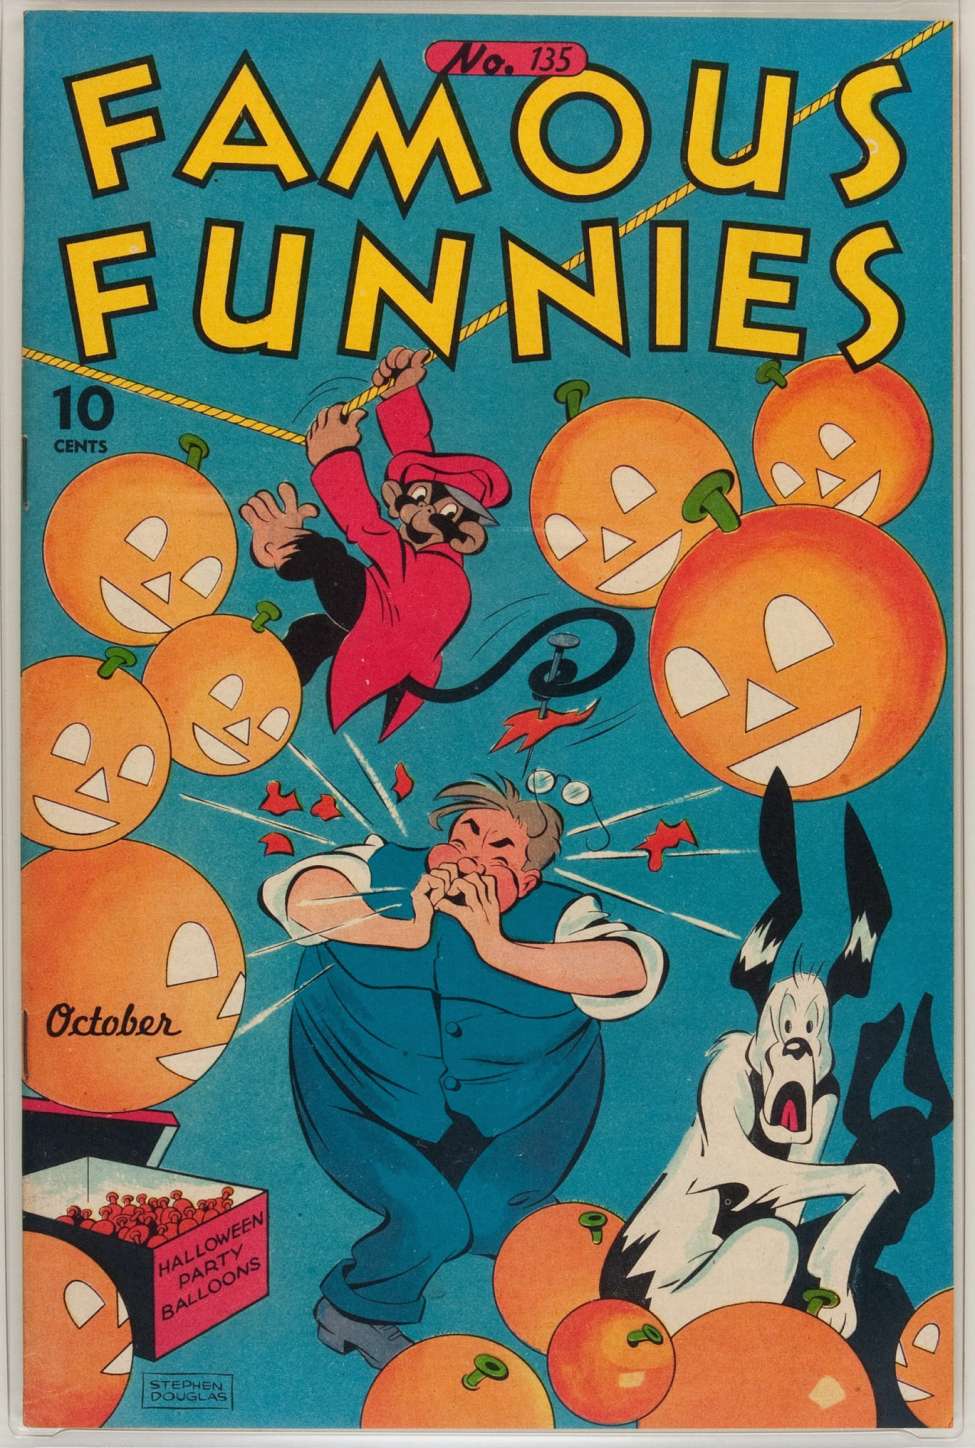 Comic Book Cover For Famous Funnies 135